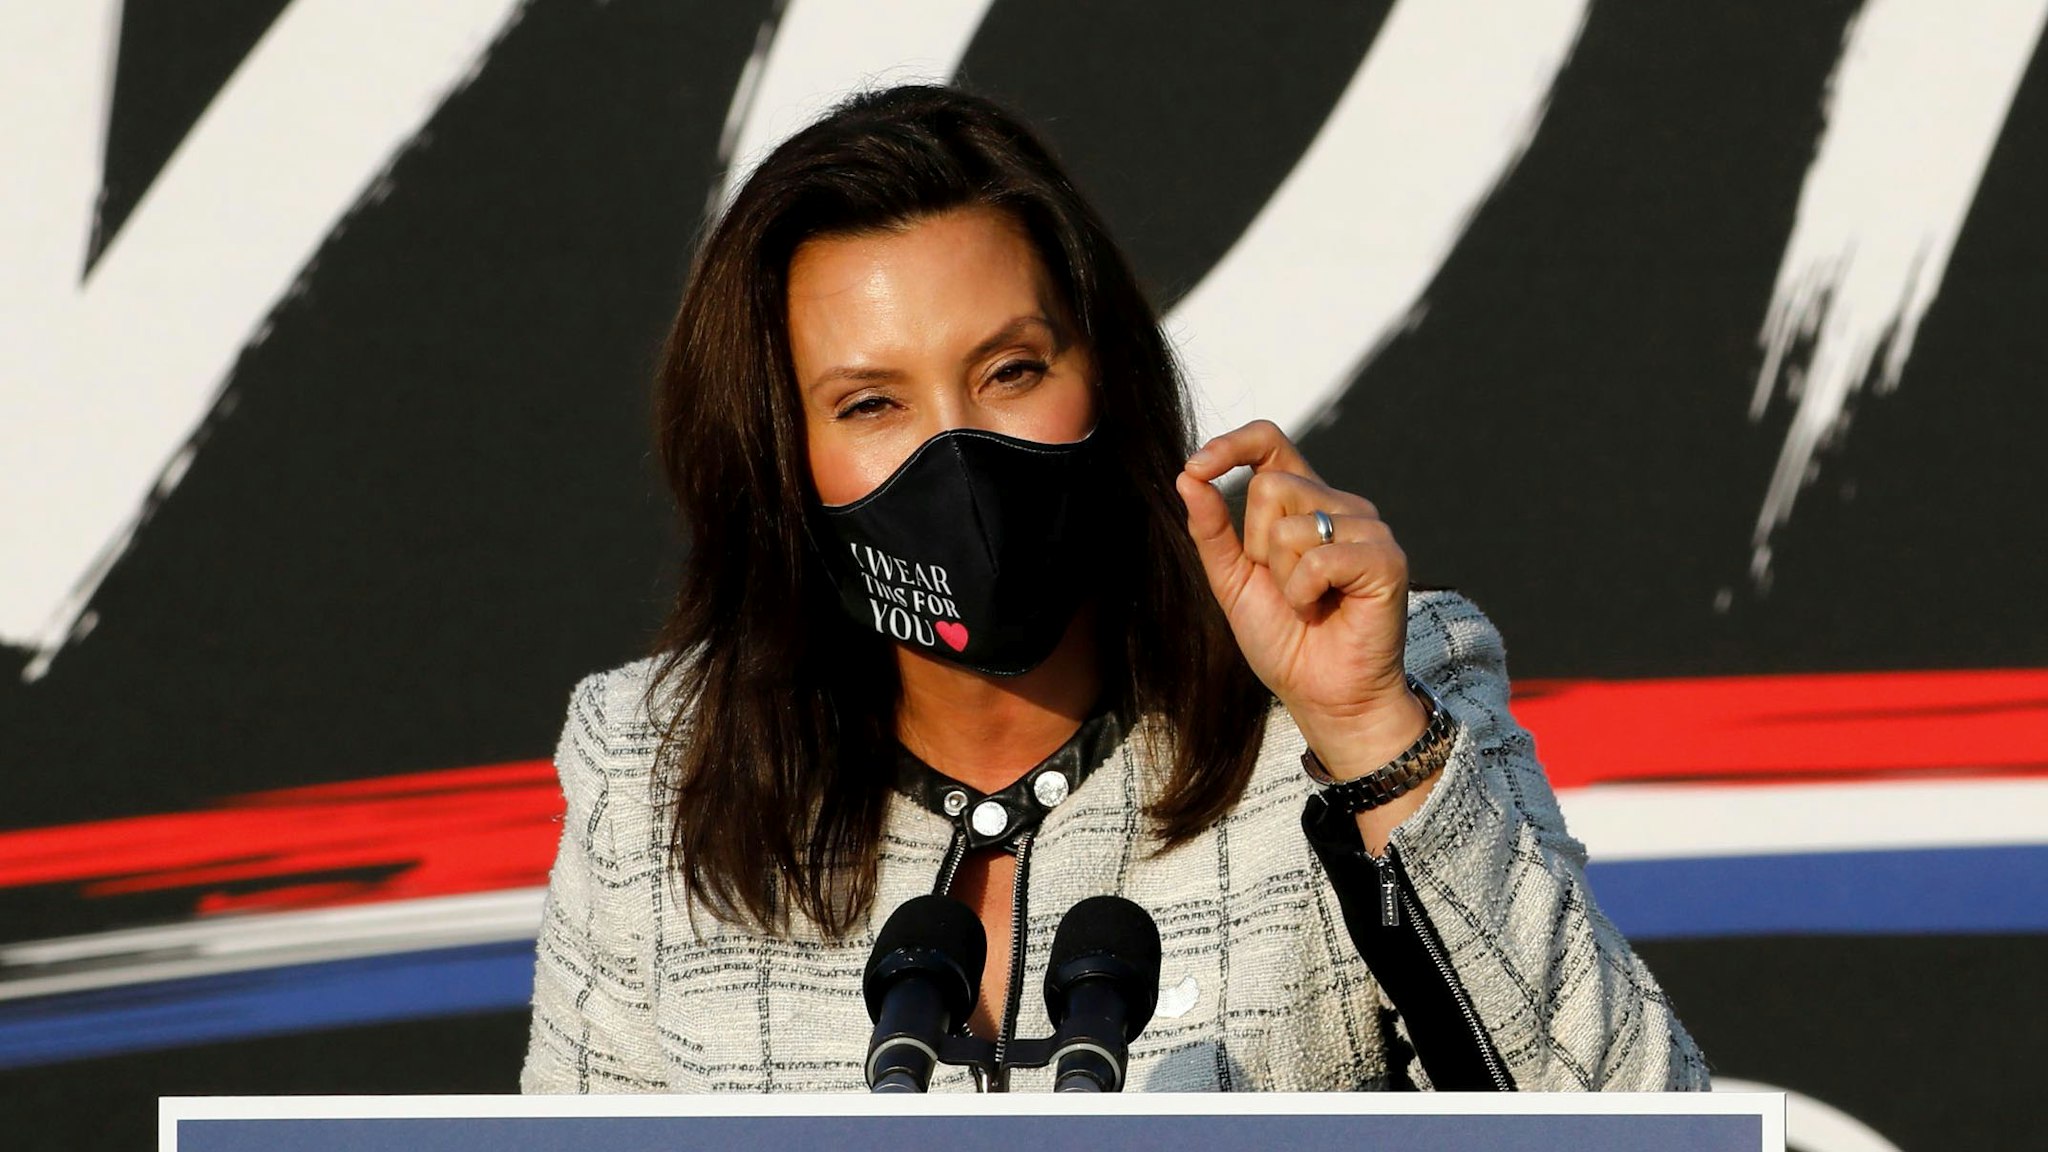 Michigan Governor Gretchen Whitmer speaks before Democratic Vice Presidential Nominee Senator Kamala Harris (D-CA) at the Detroit Pistons Practice Facility in Detroit, Michigan on September 22, 2020.